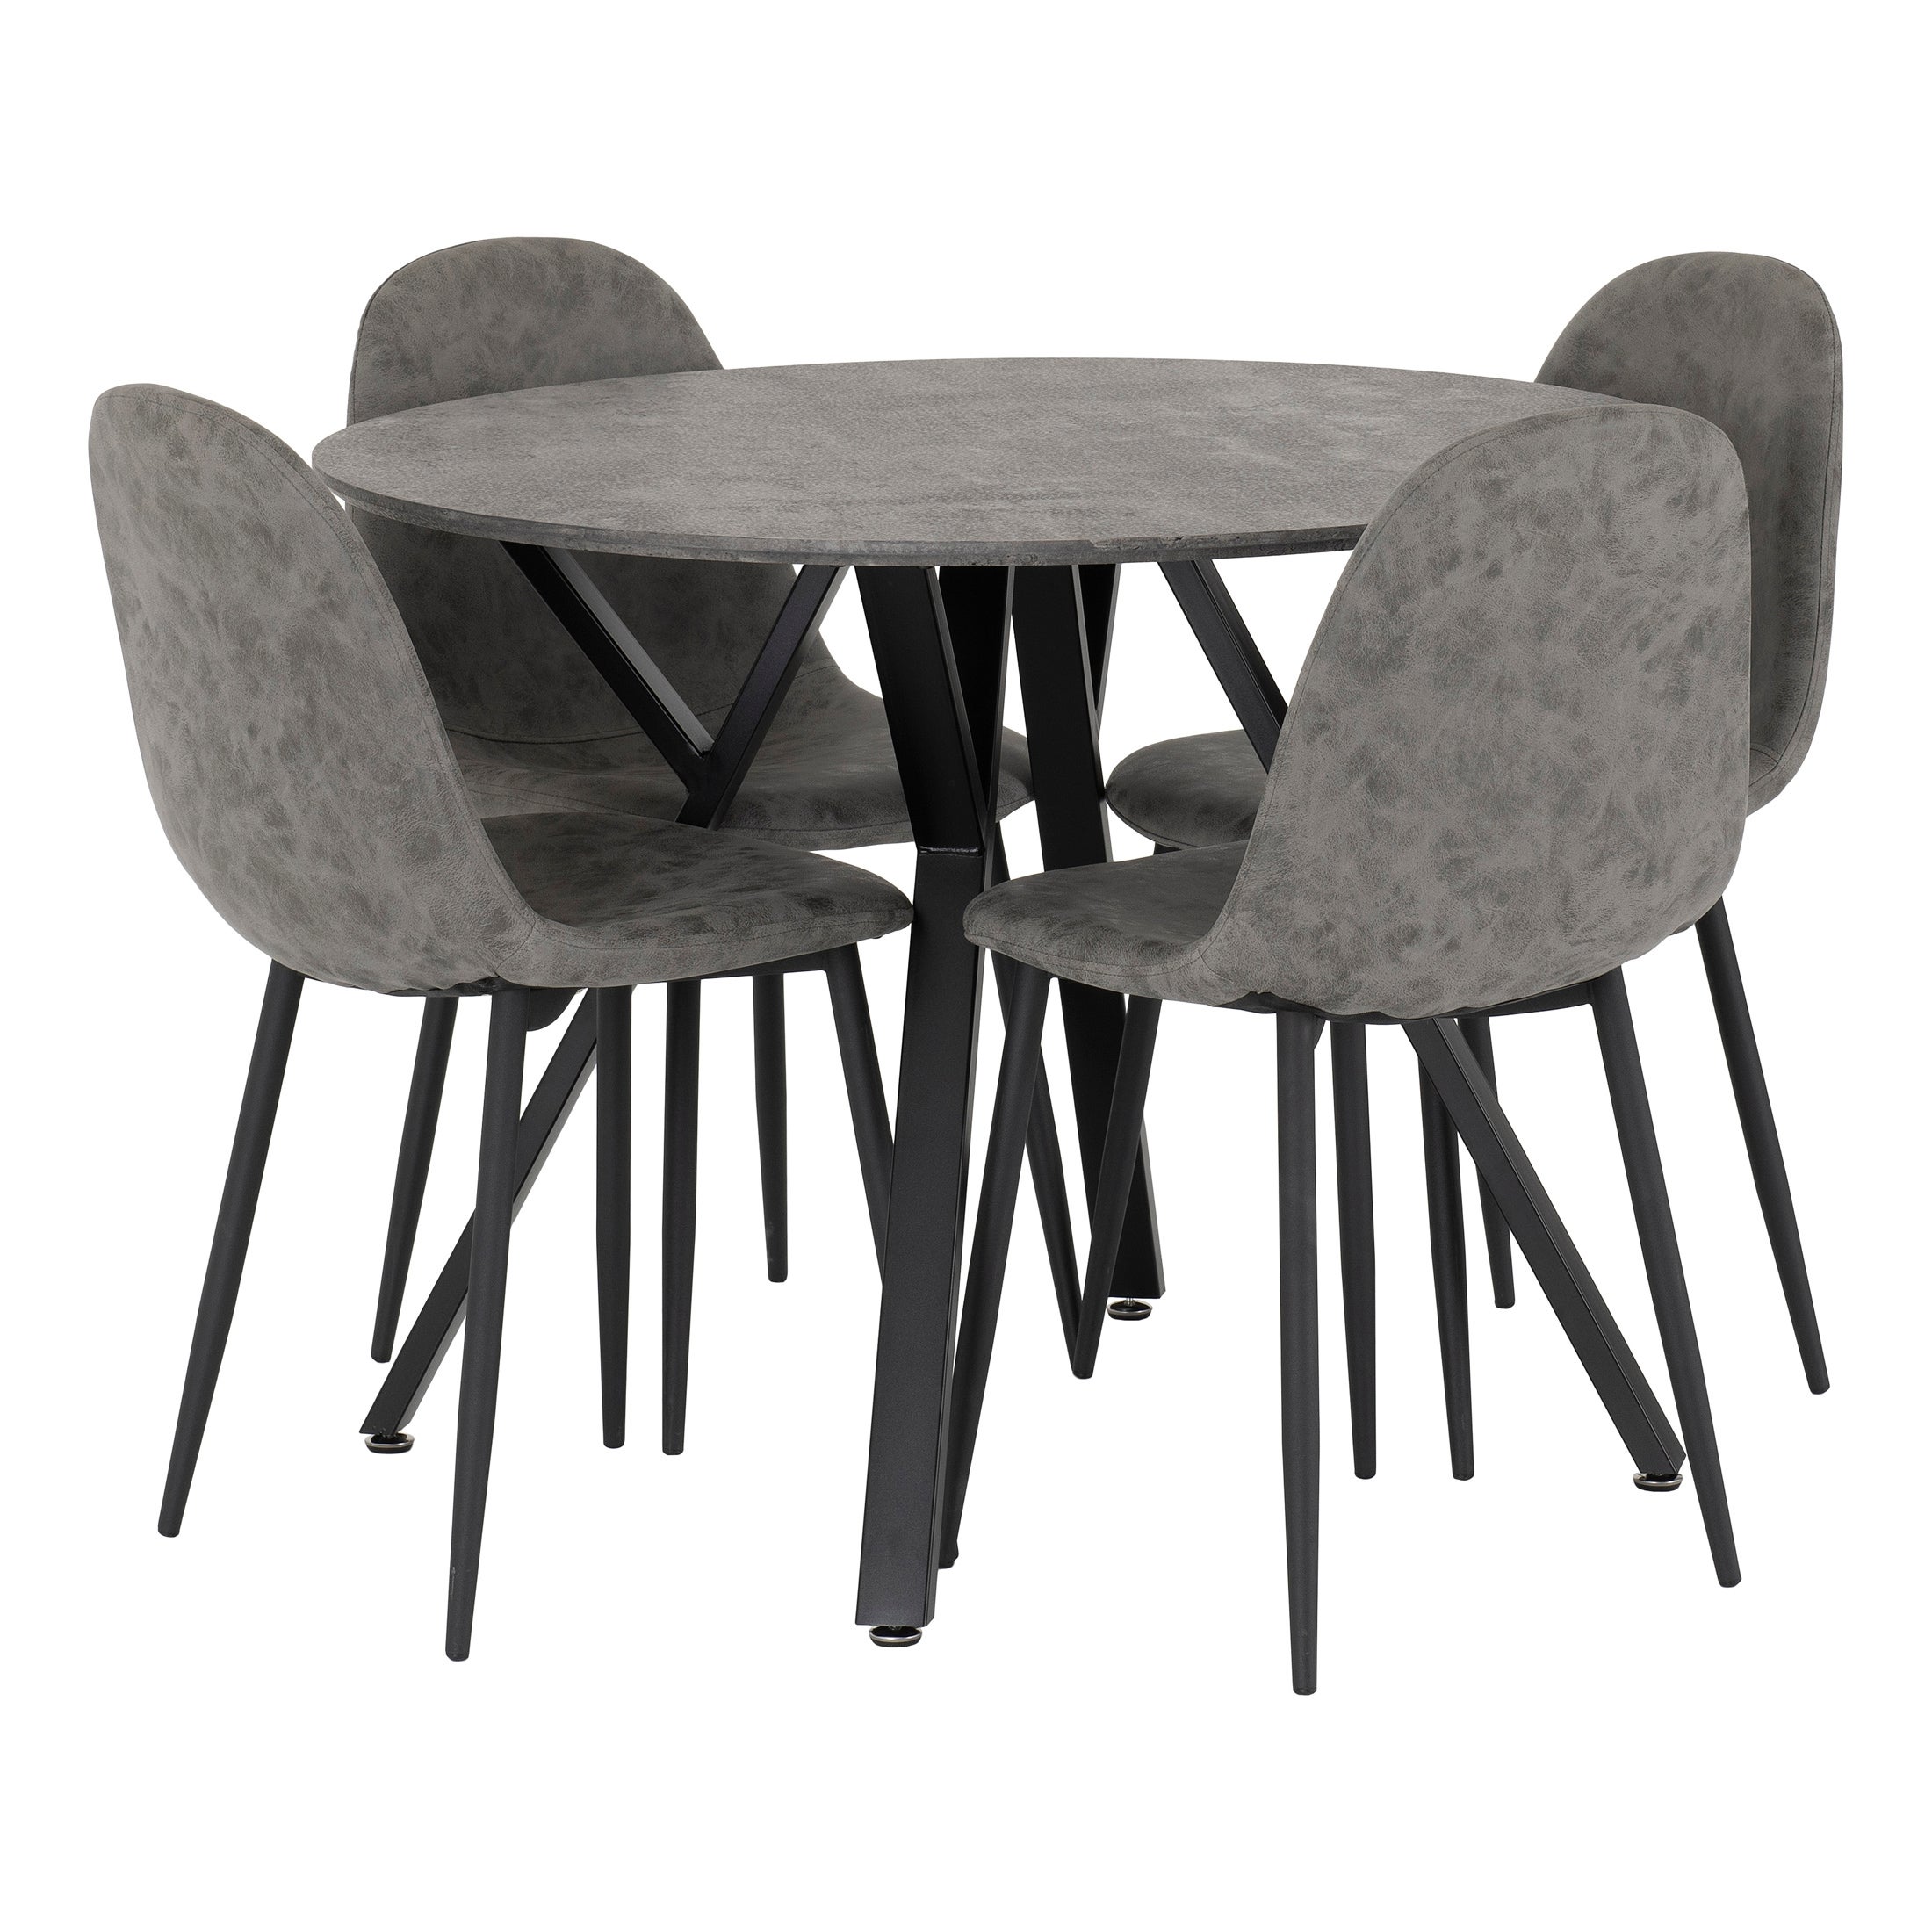 Athens Round Dining Table With 4 Chairs Grey Concrete Effect Grey